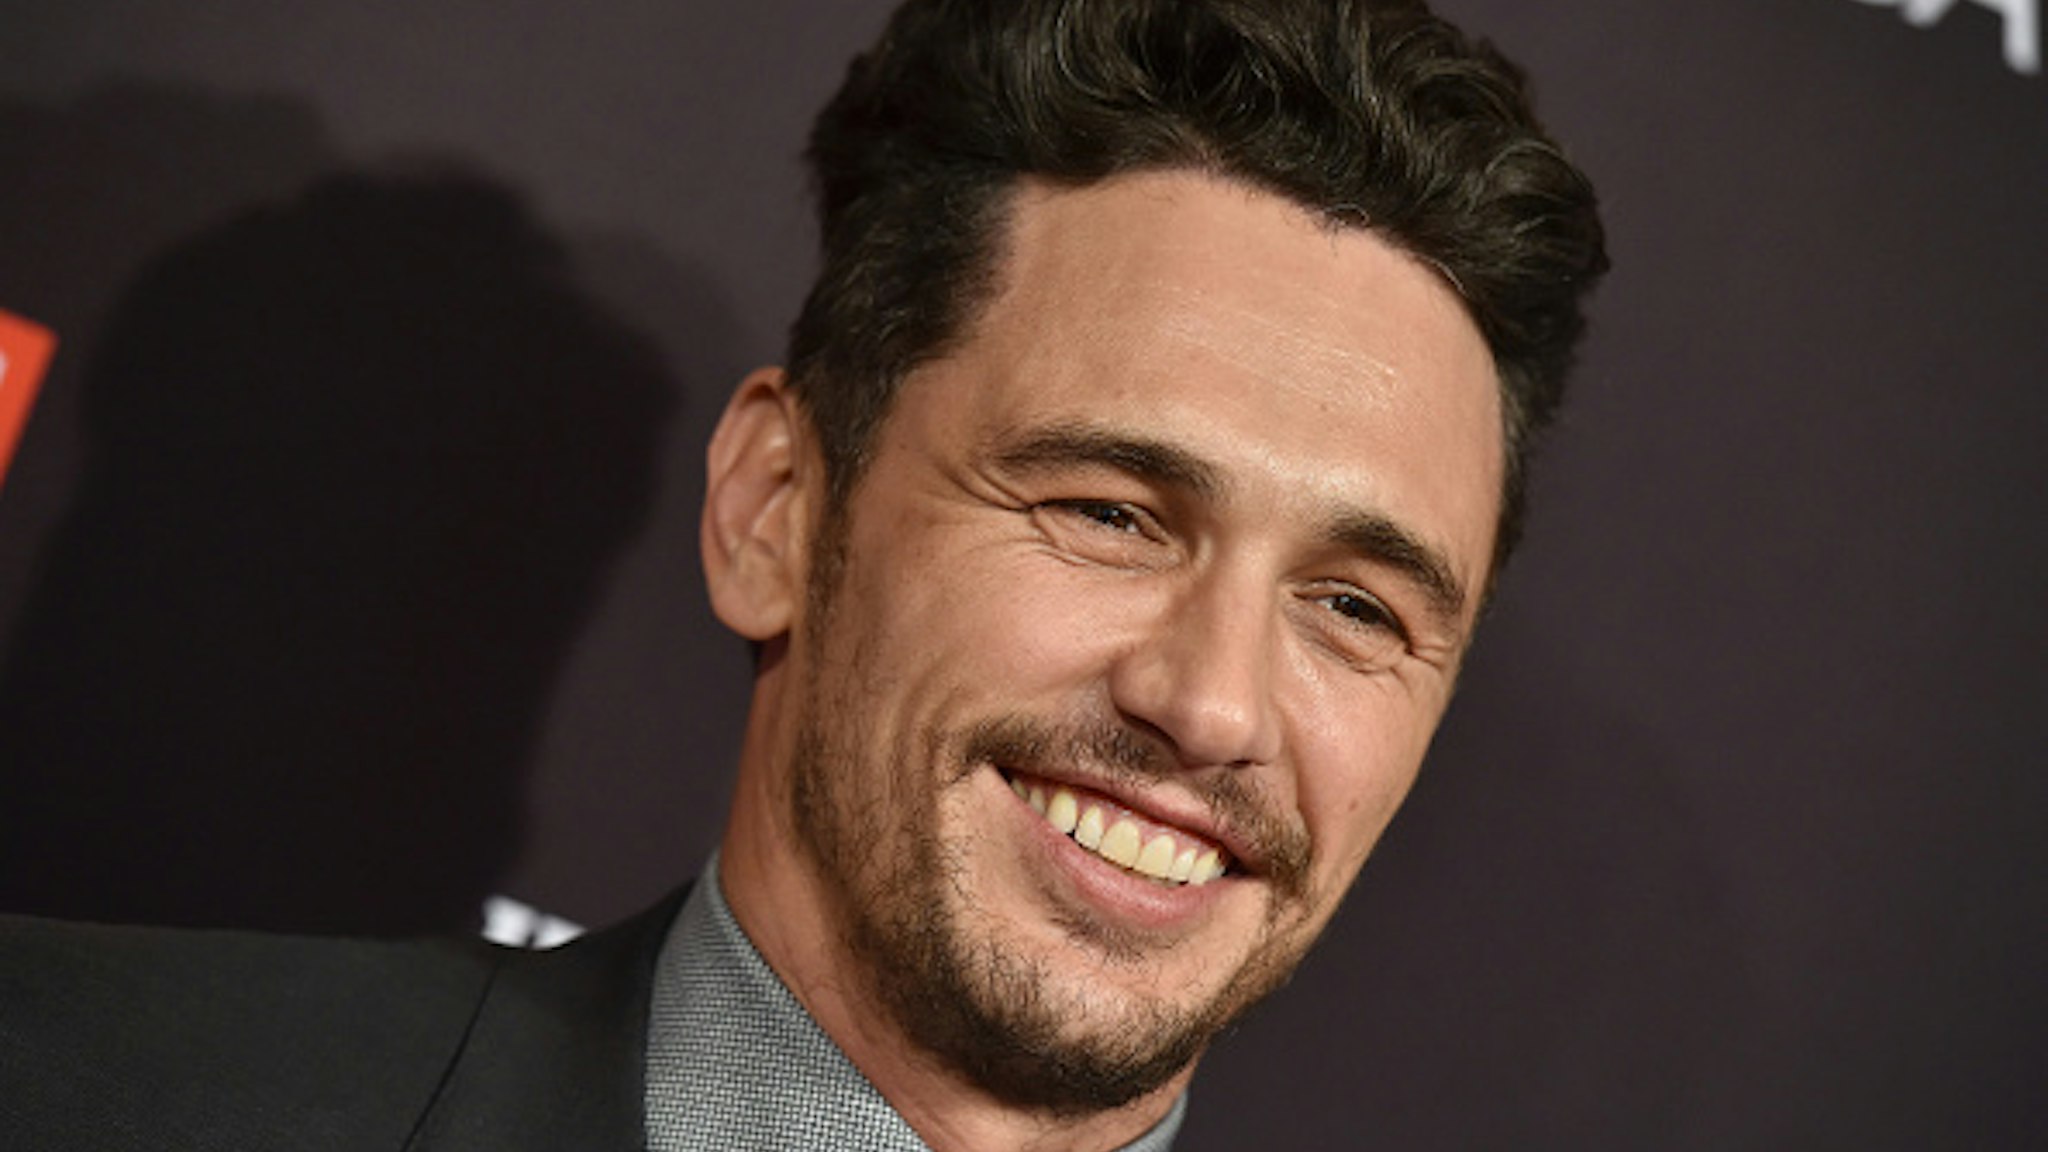 LOS ANGELES, CA - JANUARY 06: Actor James Franco arrives at The BAFTA Los Angeles Tea Party at Four Seasons Hotel Los Angeles at Beverly Hills on January 6, 2018 in Los Angeles, California.